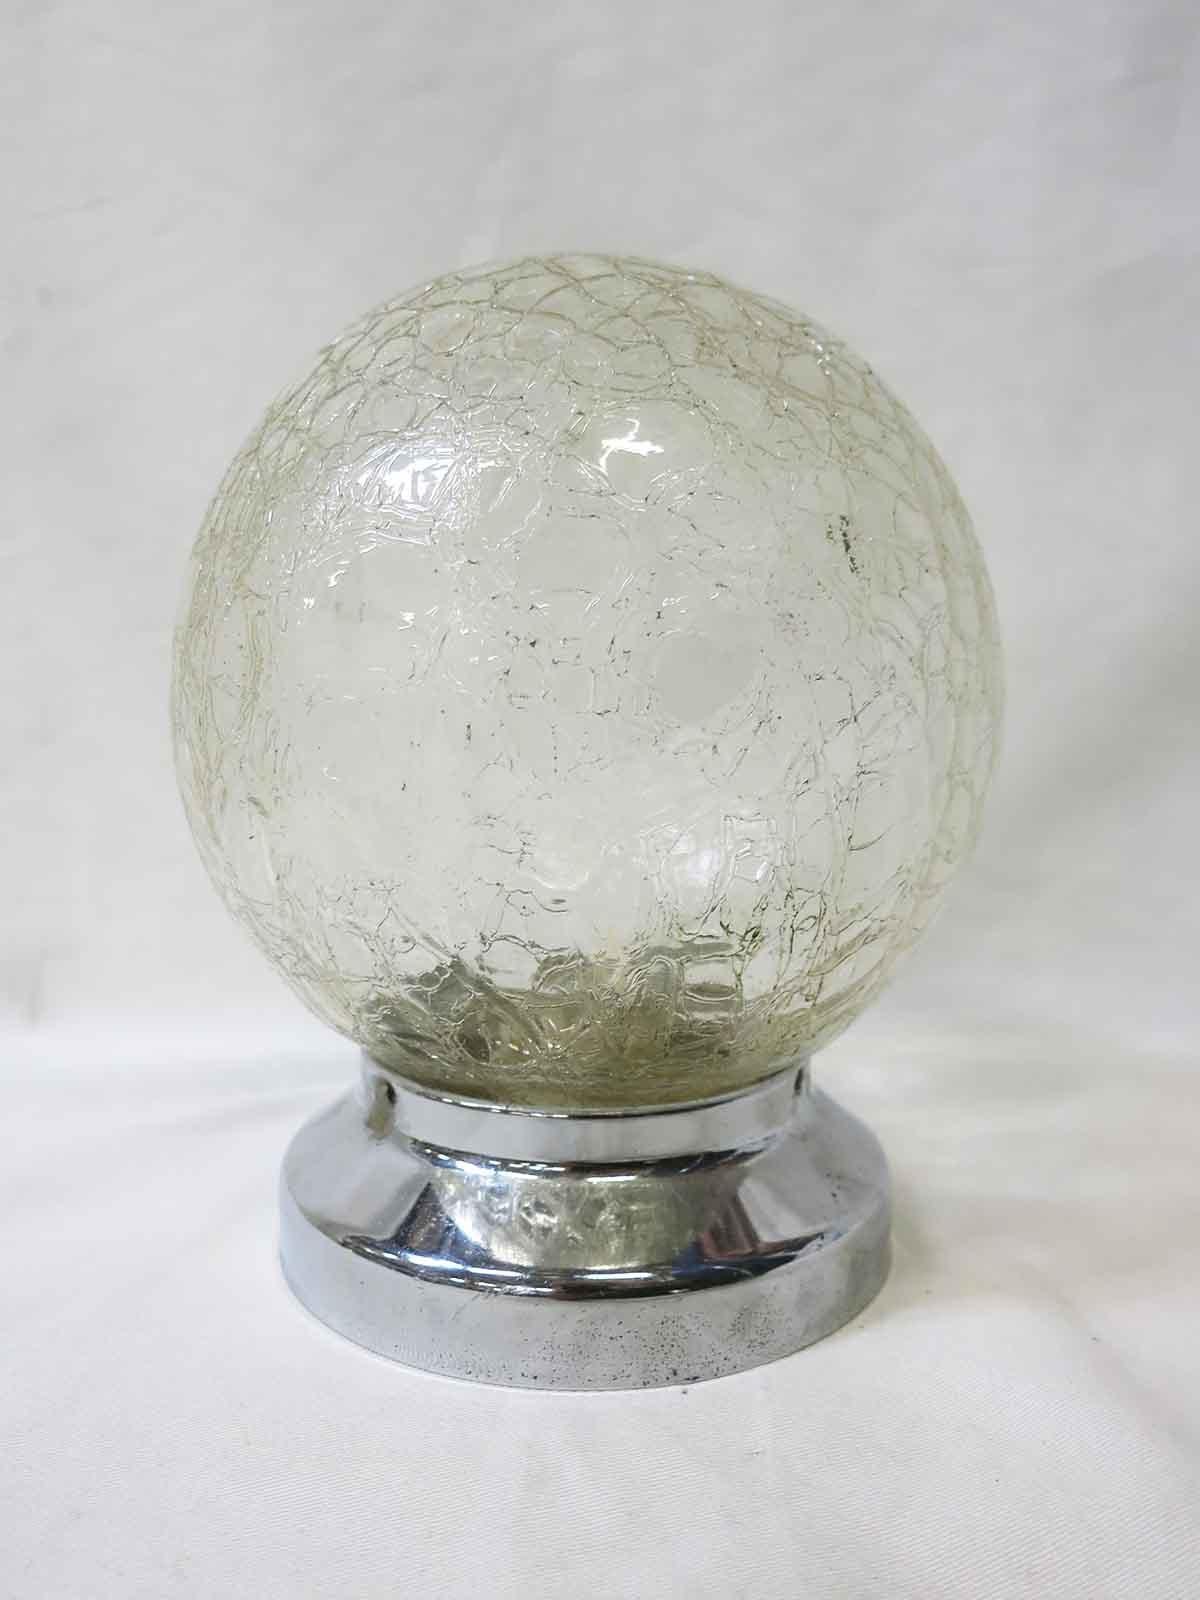 This unique vintage glass globe has a crackled glass textured surface perfect for adding modern charm to any home. Available with a new brass or chrome 3